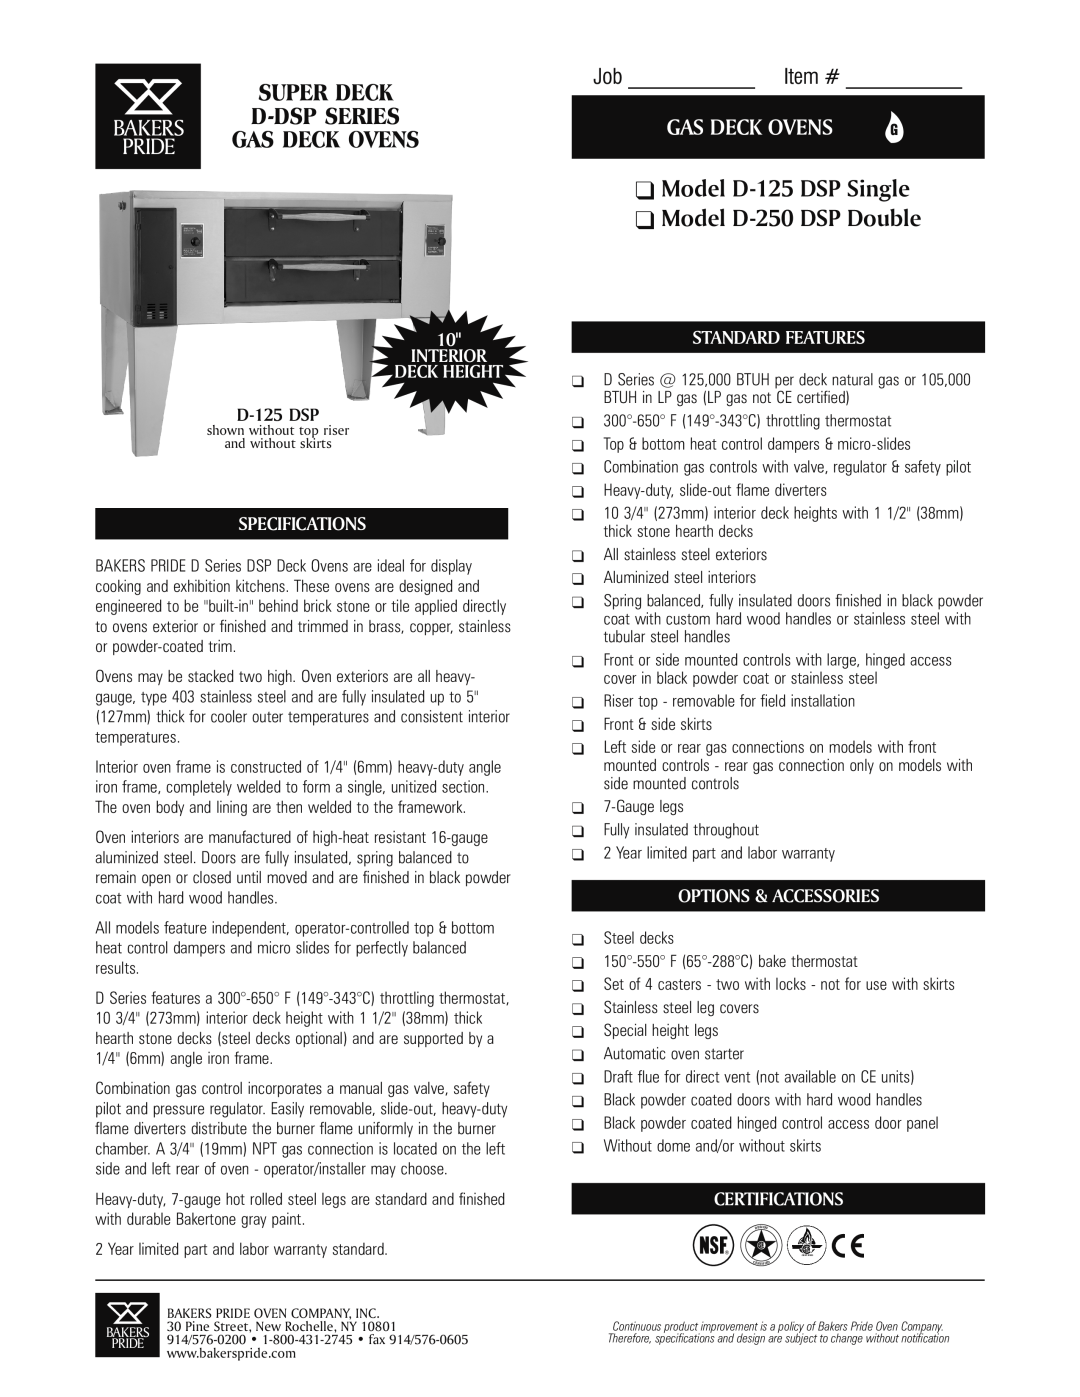 Bakers Pride Oven D-150 DSP specifications Model D-125DSP Single Model D-250DSP Double, Gas Deck Ovens, Job Item #, Bakers 